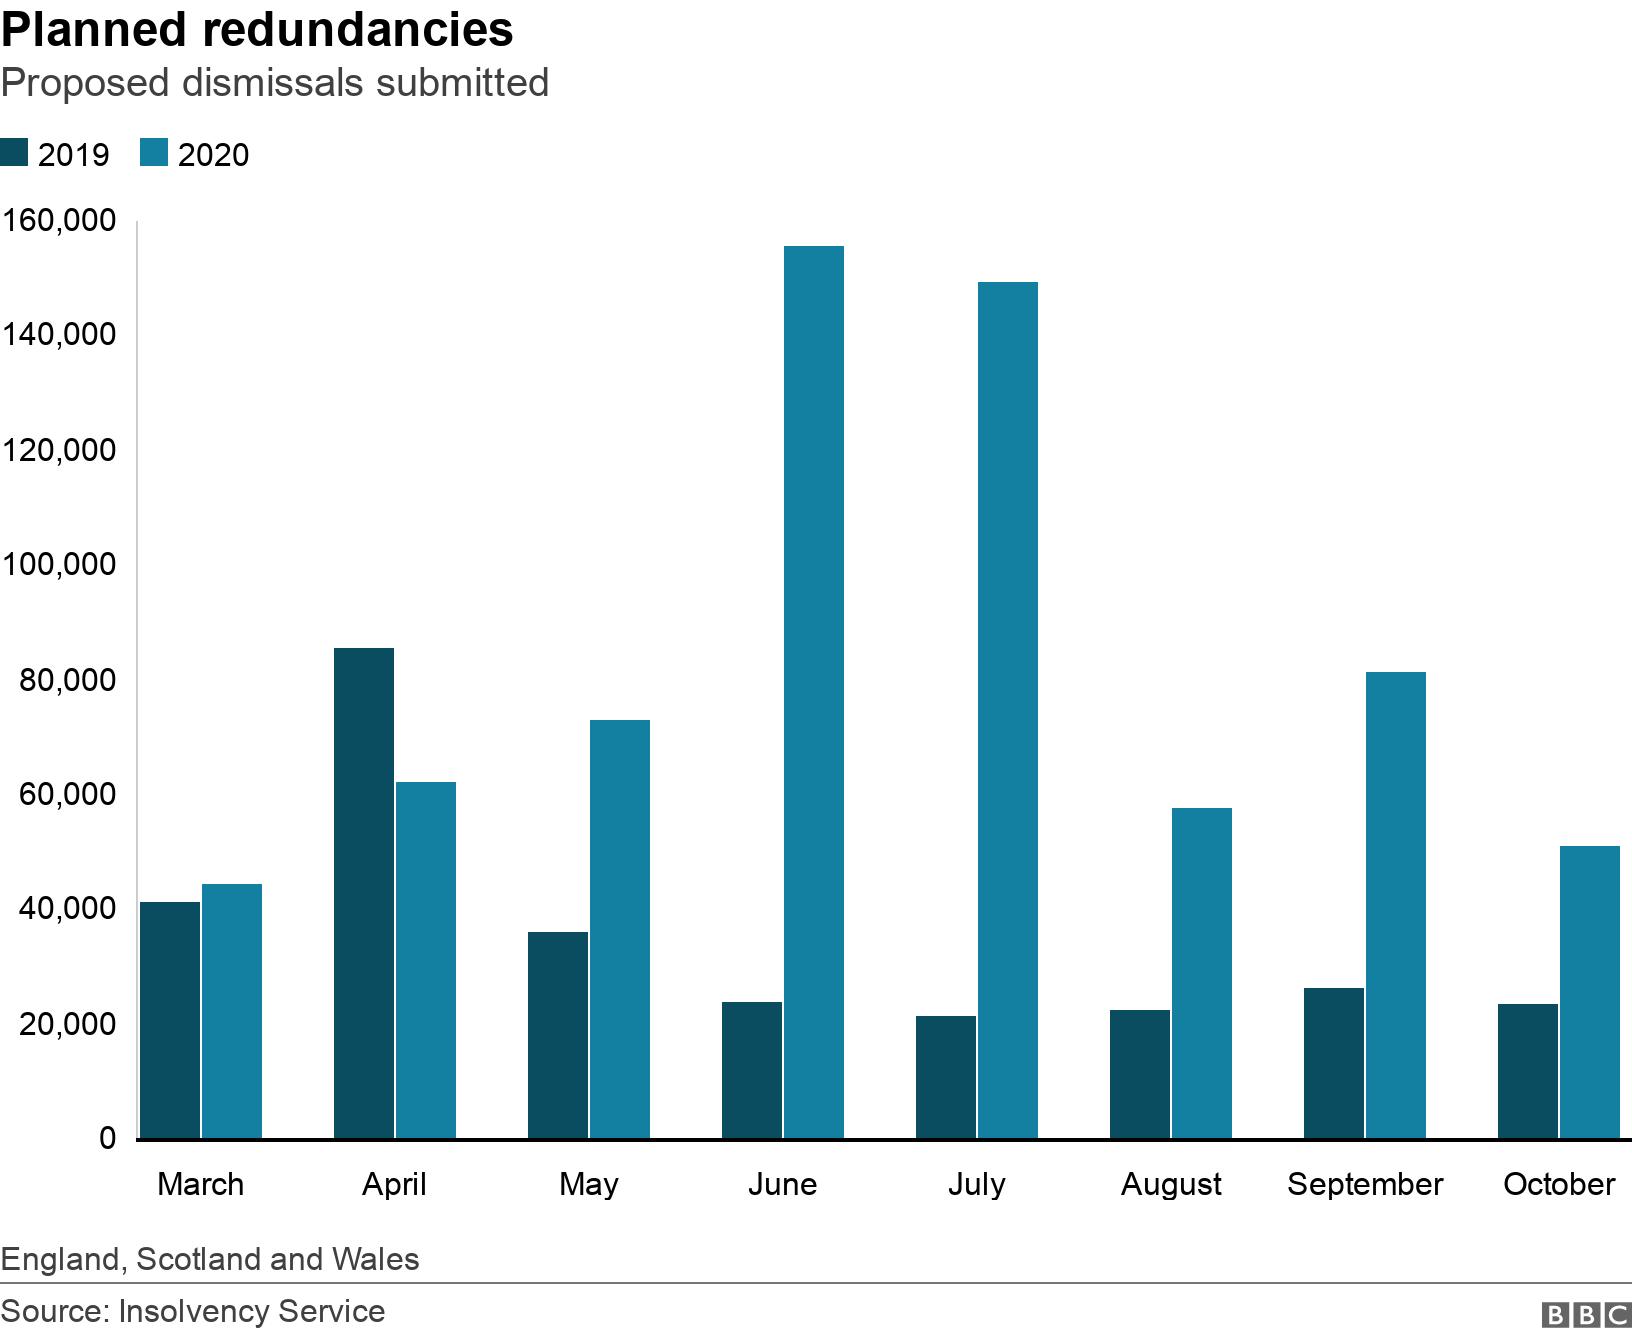 Planned redundancies. Proposed dismissals submitted. The number of proposed redundancies peaked at over 150,000 in the summer. This October saw fewer redundancies, but still more than double the level of October 2019. England, Scotland and Wales.